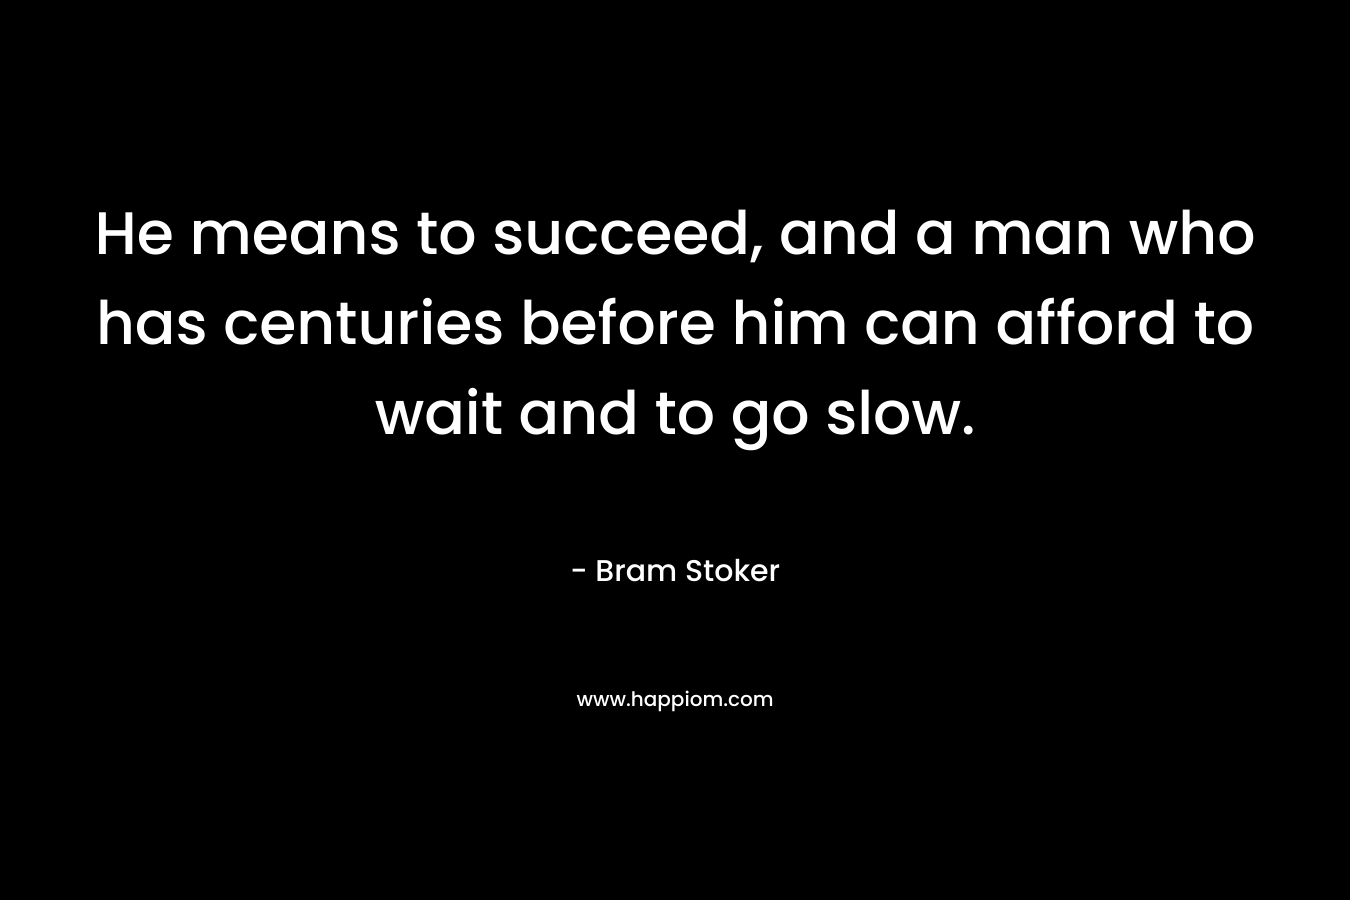 He means to succeed, and a man who has centuries before him can afford to wait and to go slow. – Bram Stoker